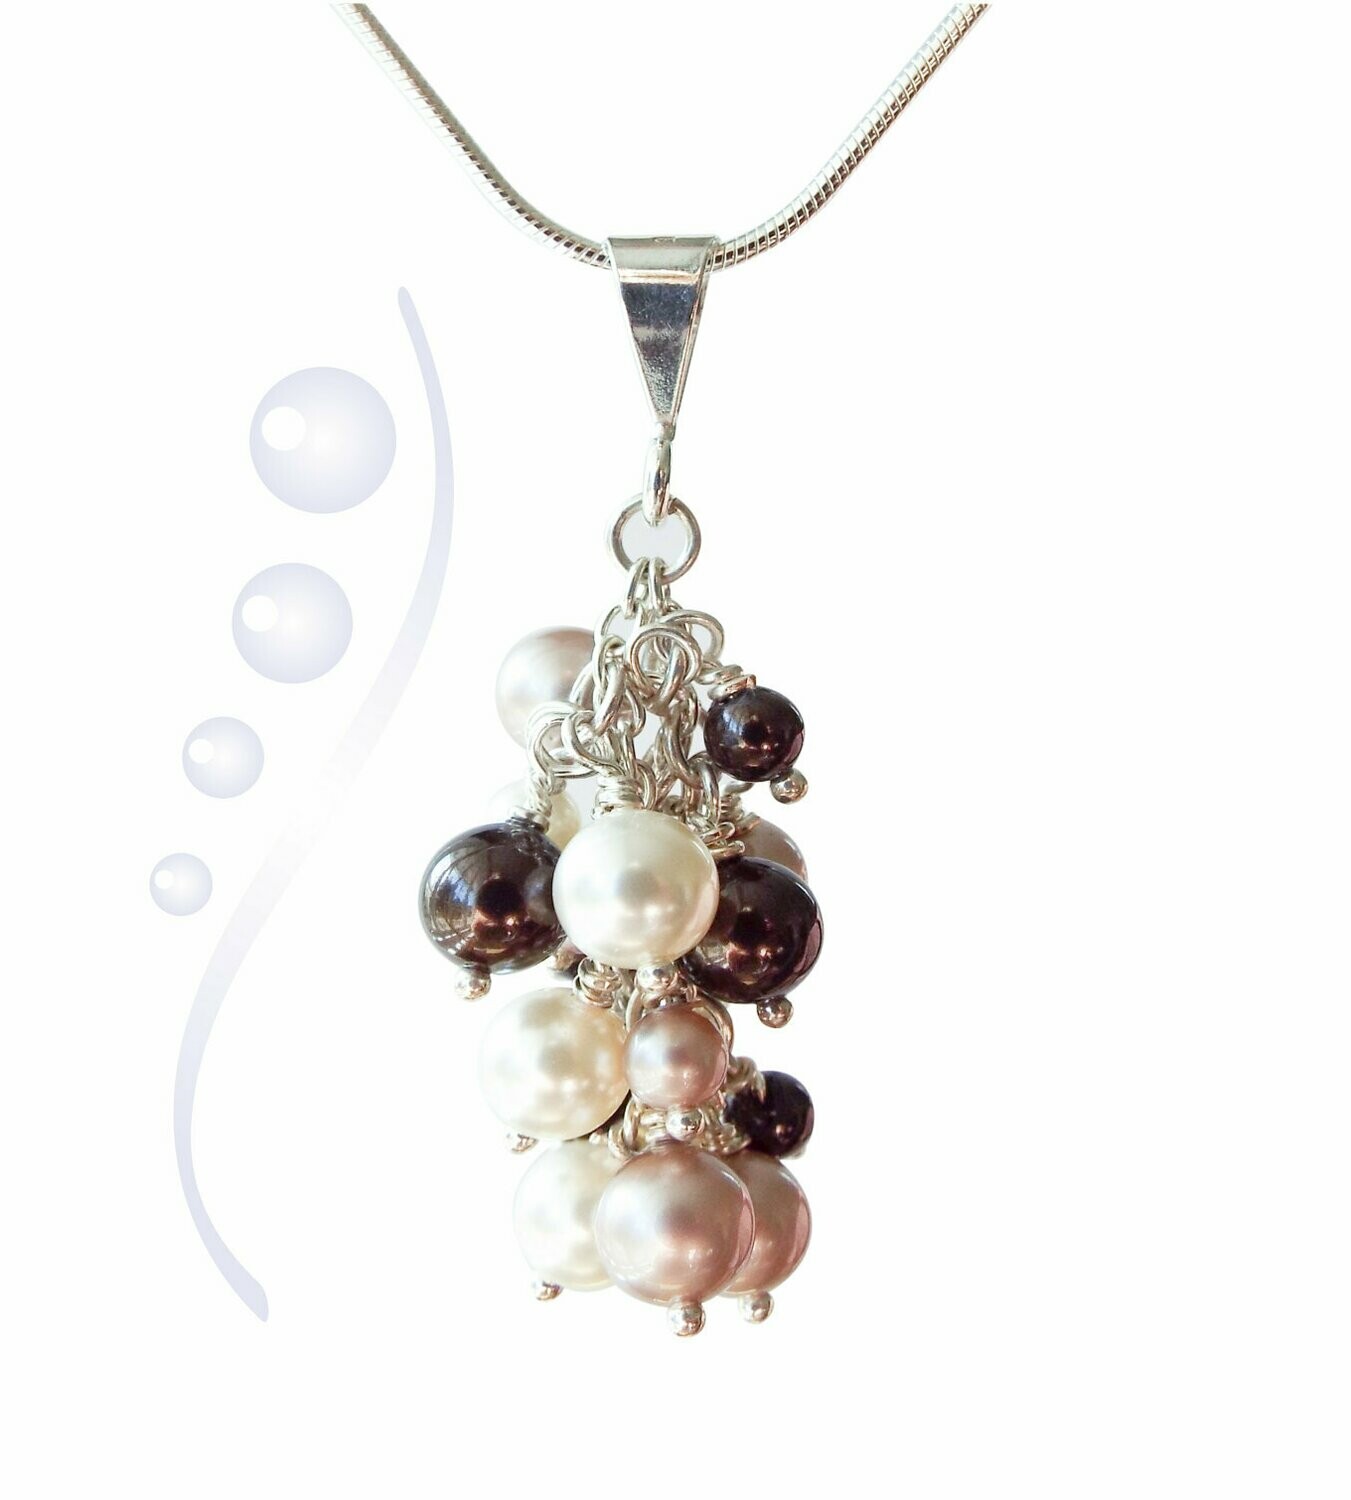 Chocolate and Cream Pendant Necklace with Swarovski Crystal Pearls